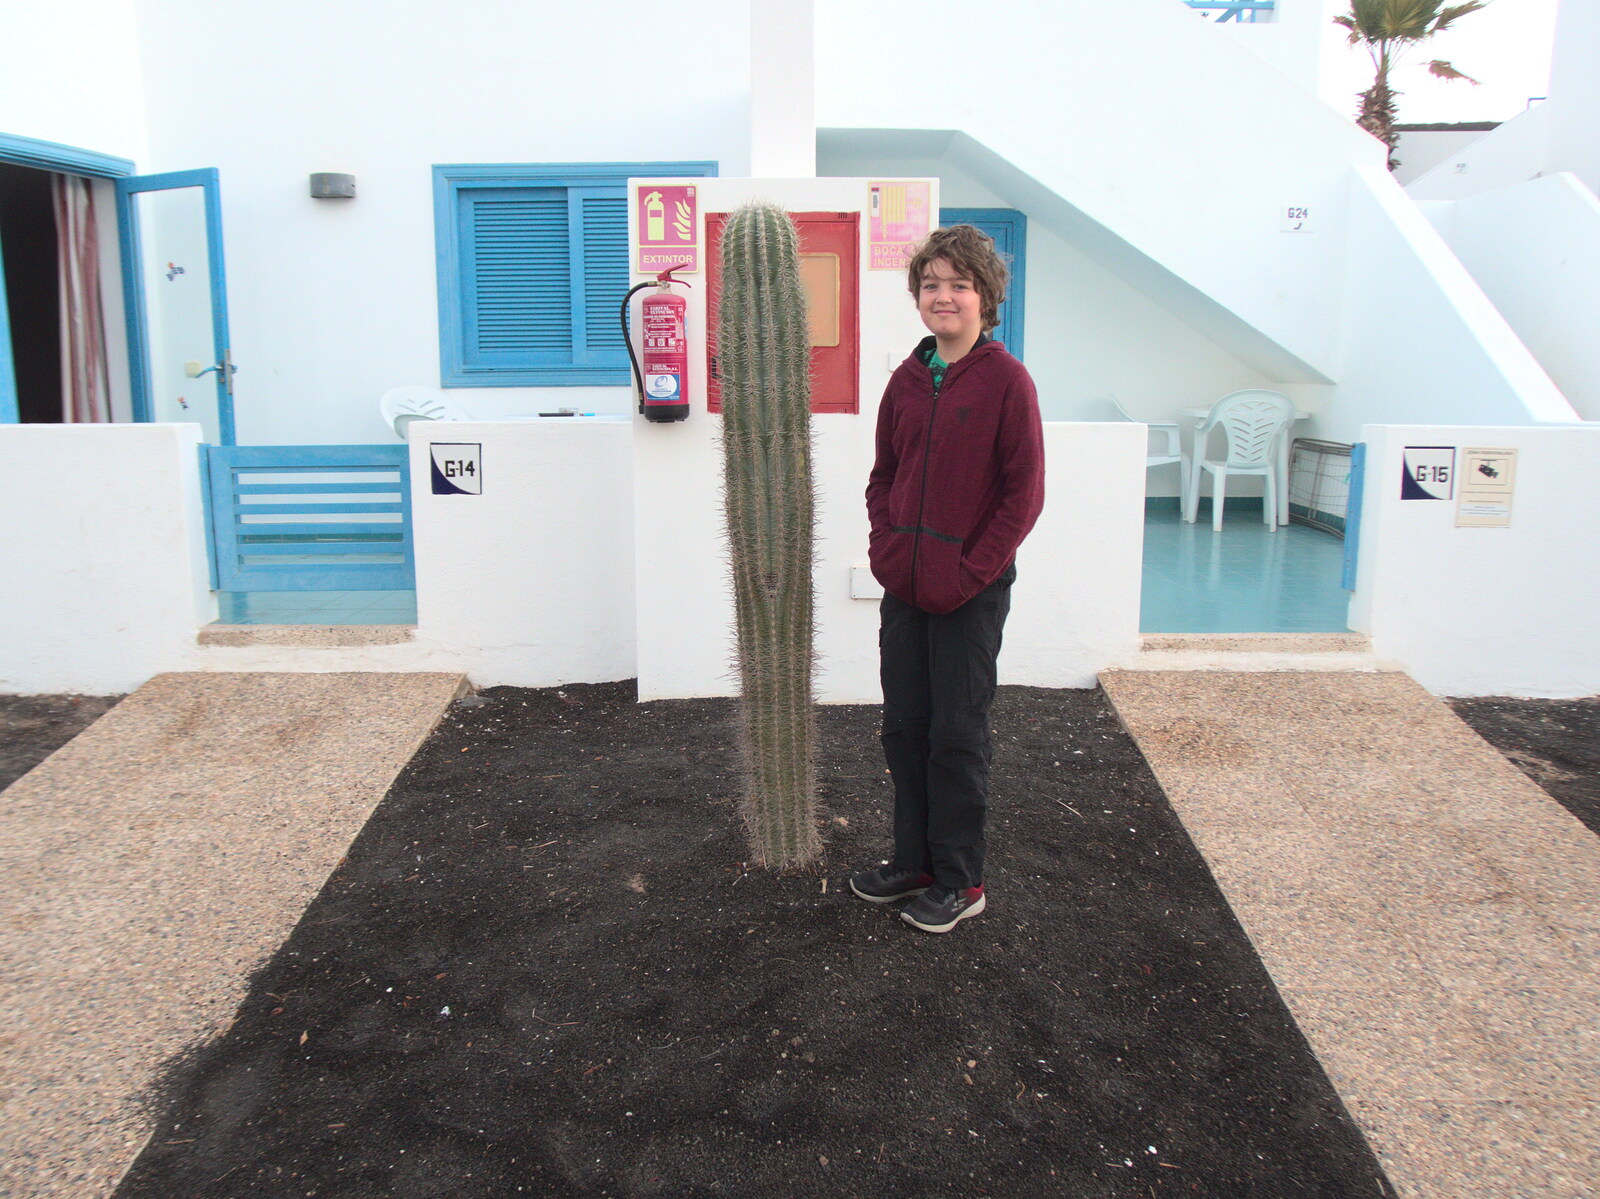 Fred stands next to a cactus from The Volcanoes of Lanzarote, Canary Islands, Spain - 27th October 2021